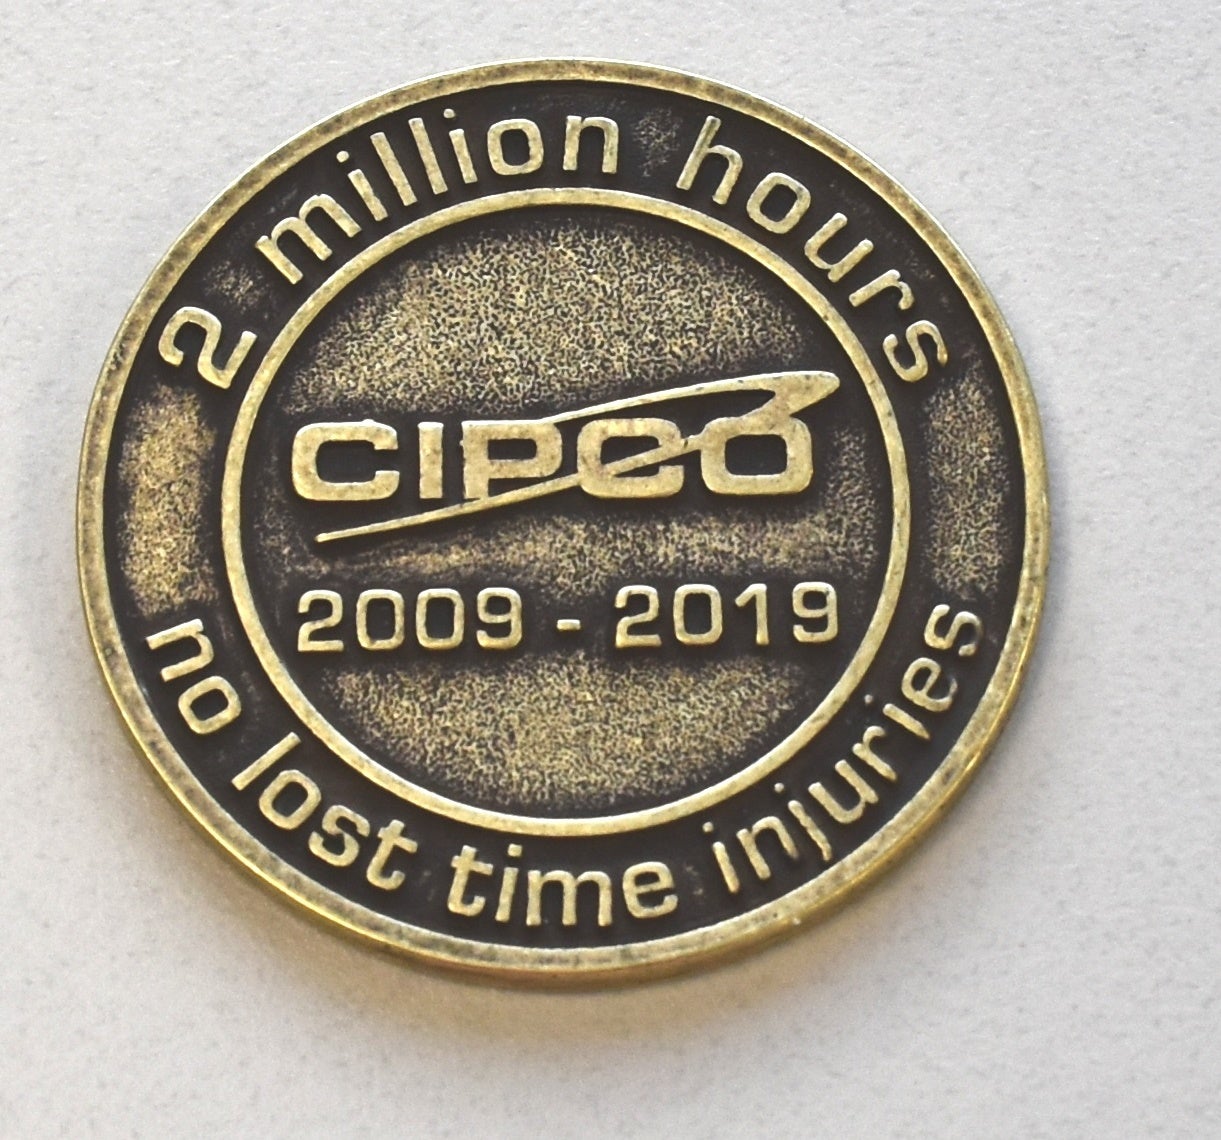 2 Million safety hours coin